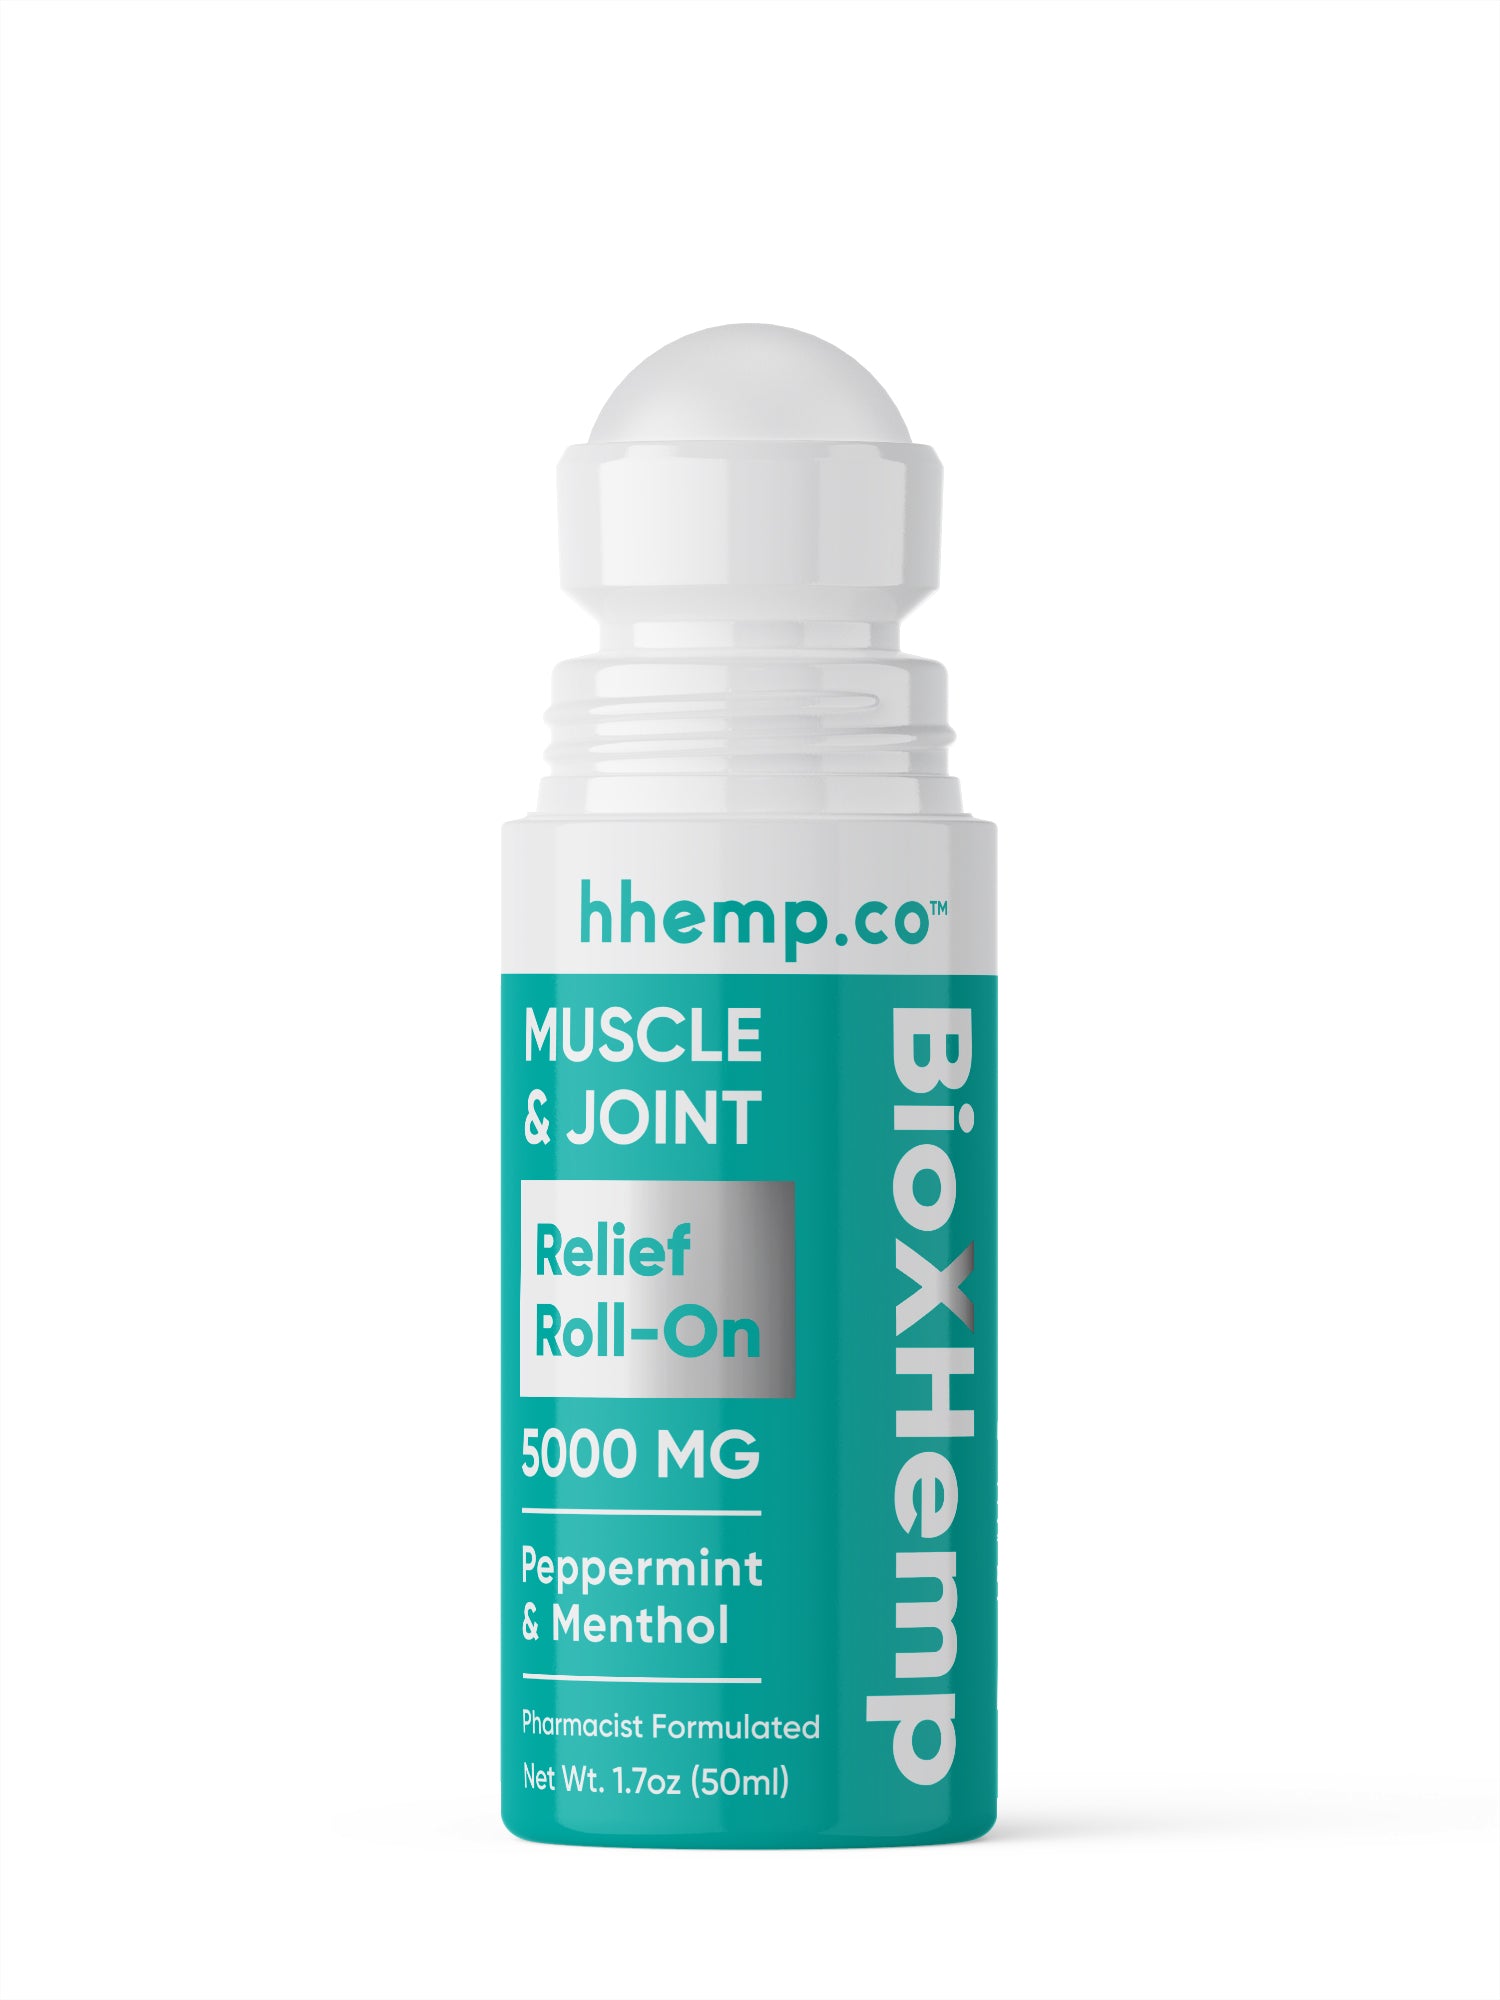 5000mg Muscle & Joint Relief Roll-On - Peppermint and Menthol